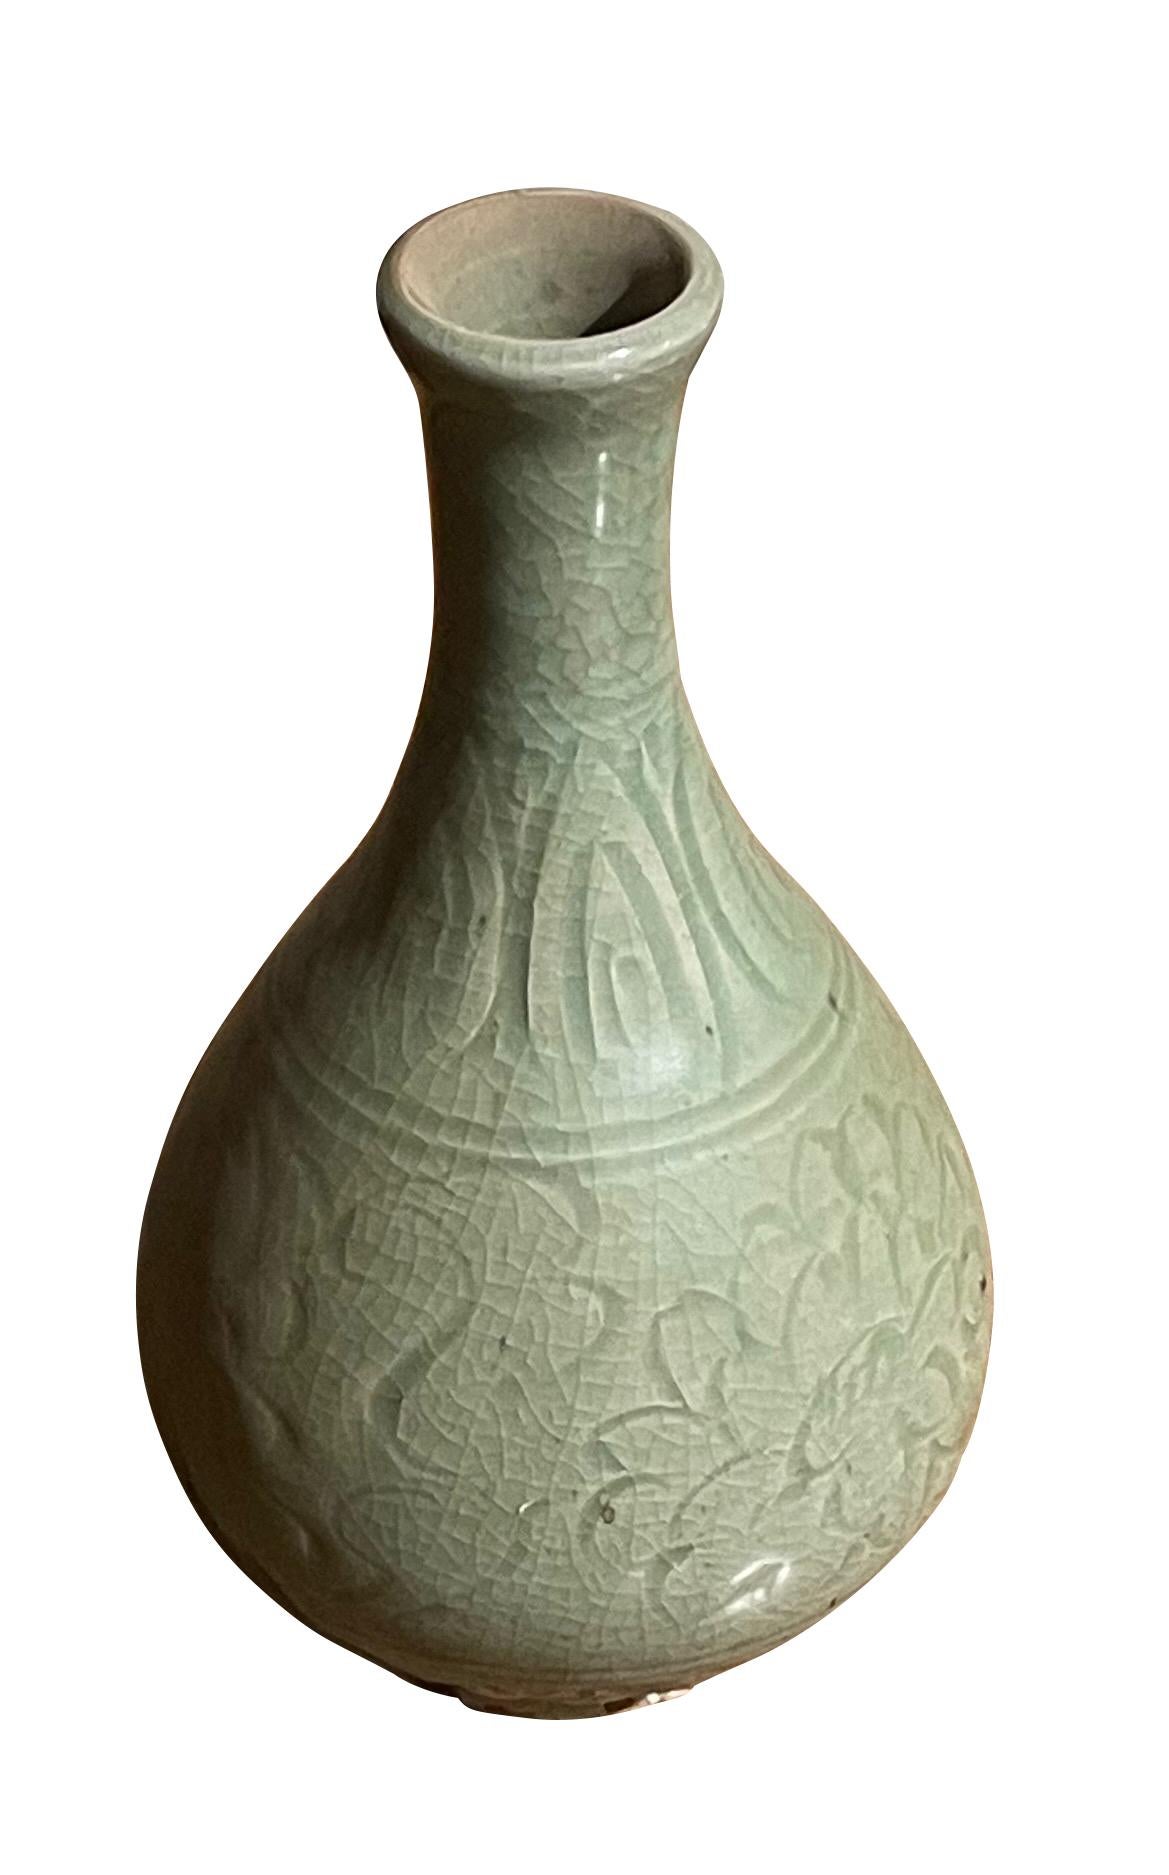 Contemporary Chinese pale celadon vase with decorative surface pattern.
Crackle finish glaze.
Slender neck with small opening.
From a large collection.
ARRIVING MARCH